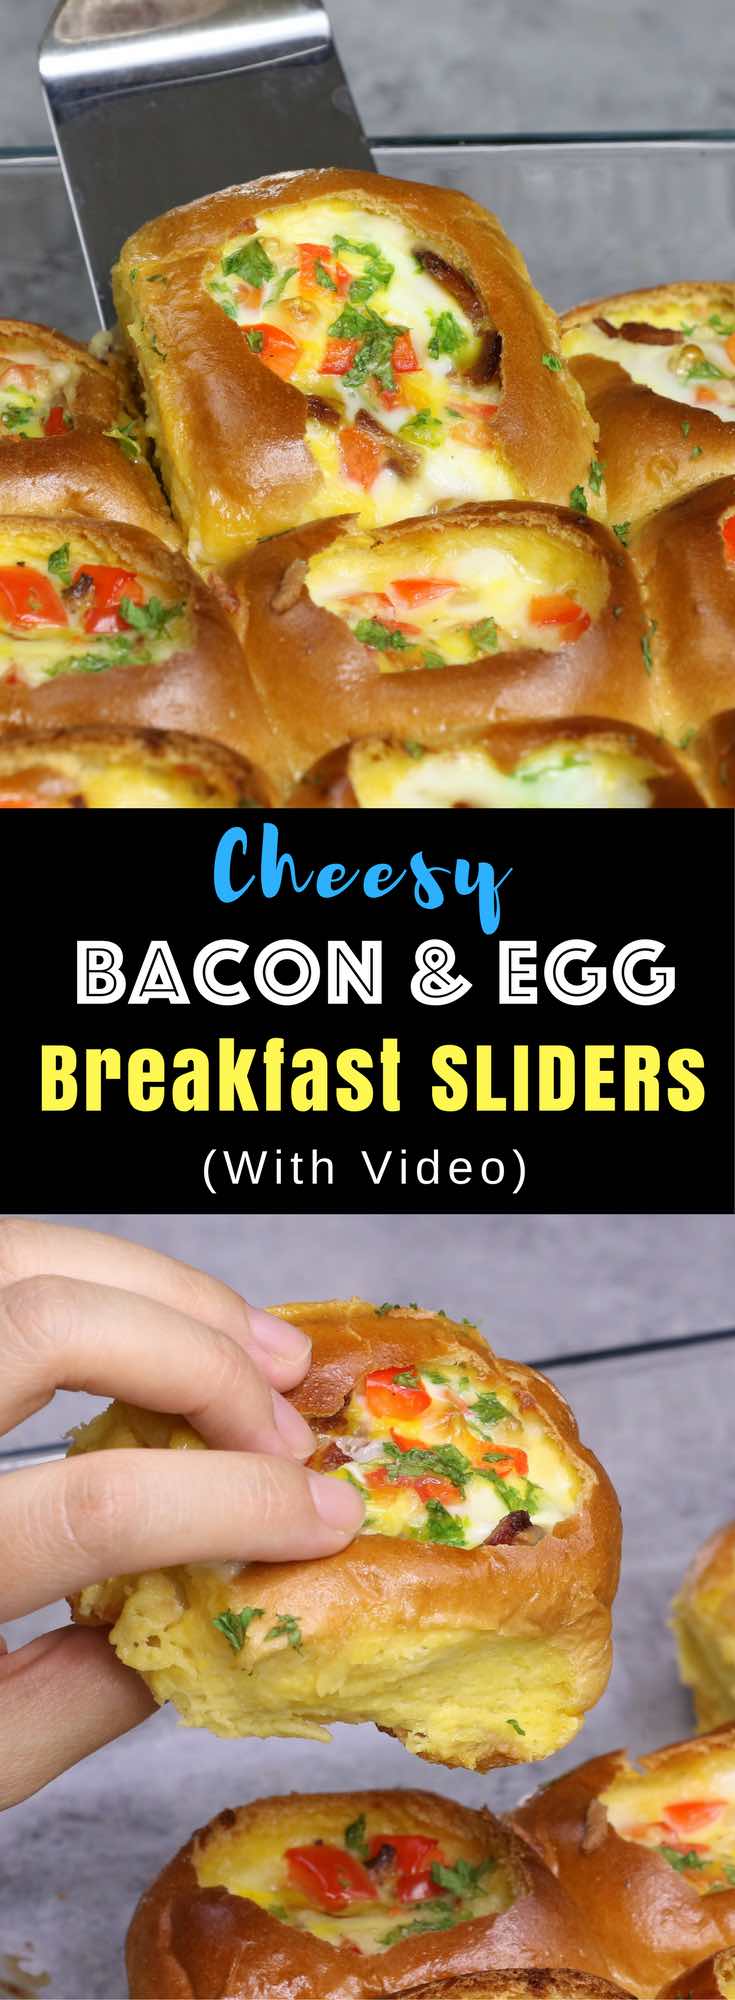 Cheesy Bacon and Egg Breakfast Sliders – Soft and tender sliders are stuffed with bacon, egg, cheese and bell pepper. So delicious! All you need is some simple ingredients: dinner rolls, bacon, egg, cheese, bell pepper, and milk. Great for a weekend brunch or game day party. A perfect pull apart breakfast or brunch of your dreams! Quick and easy recipe. Video recipe. | Tipbuzz.com